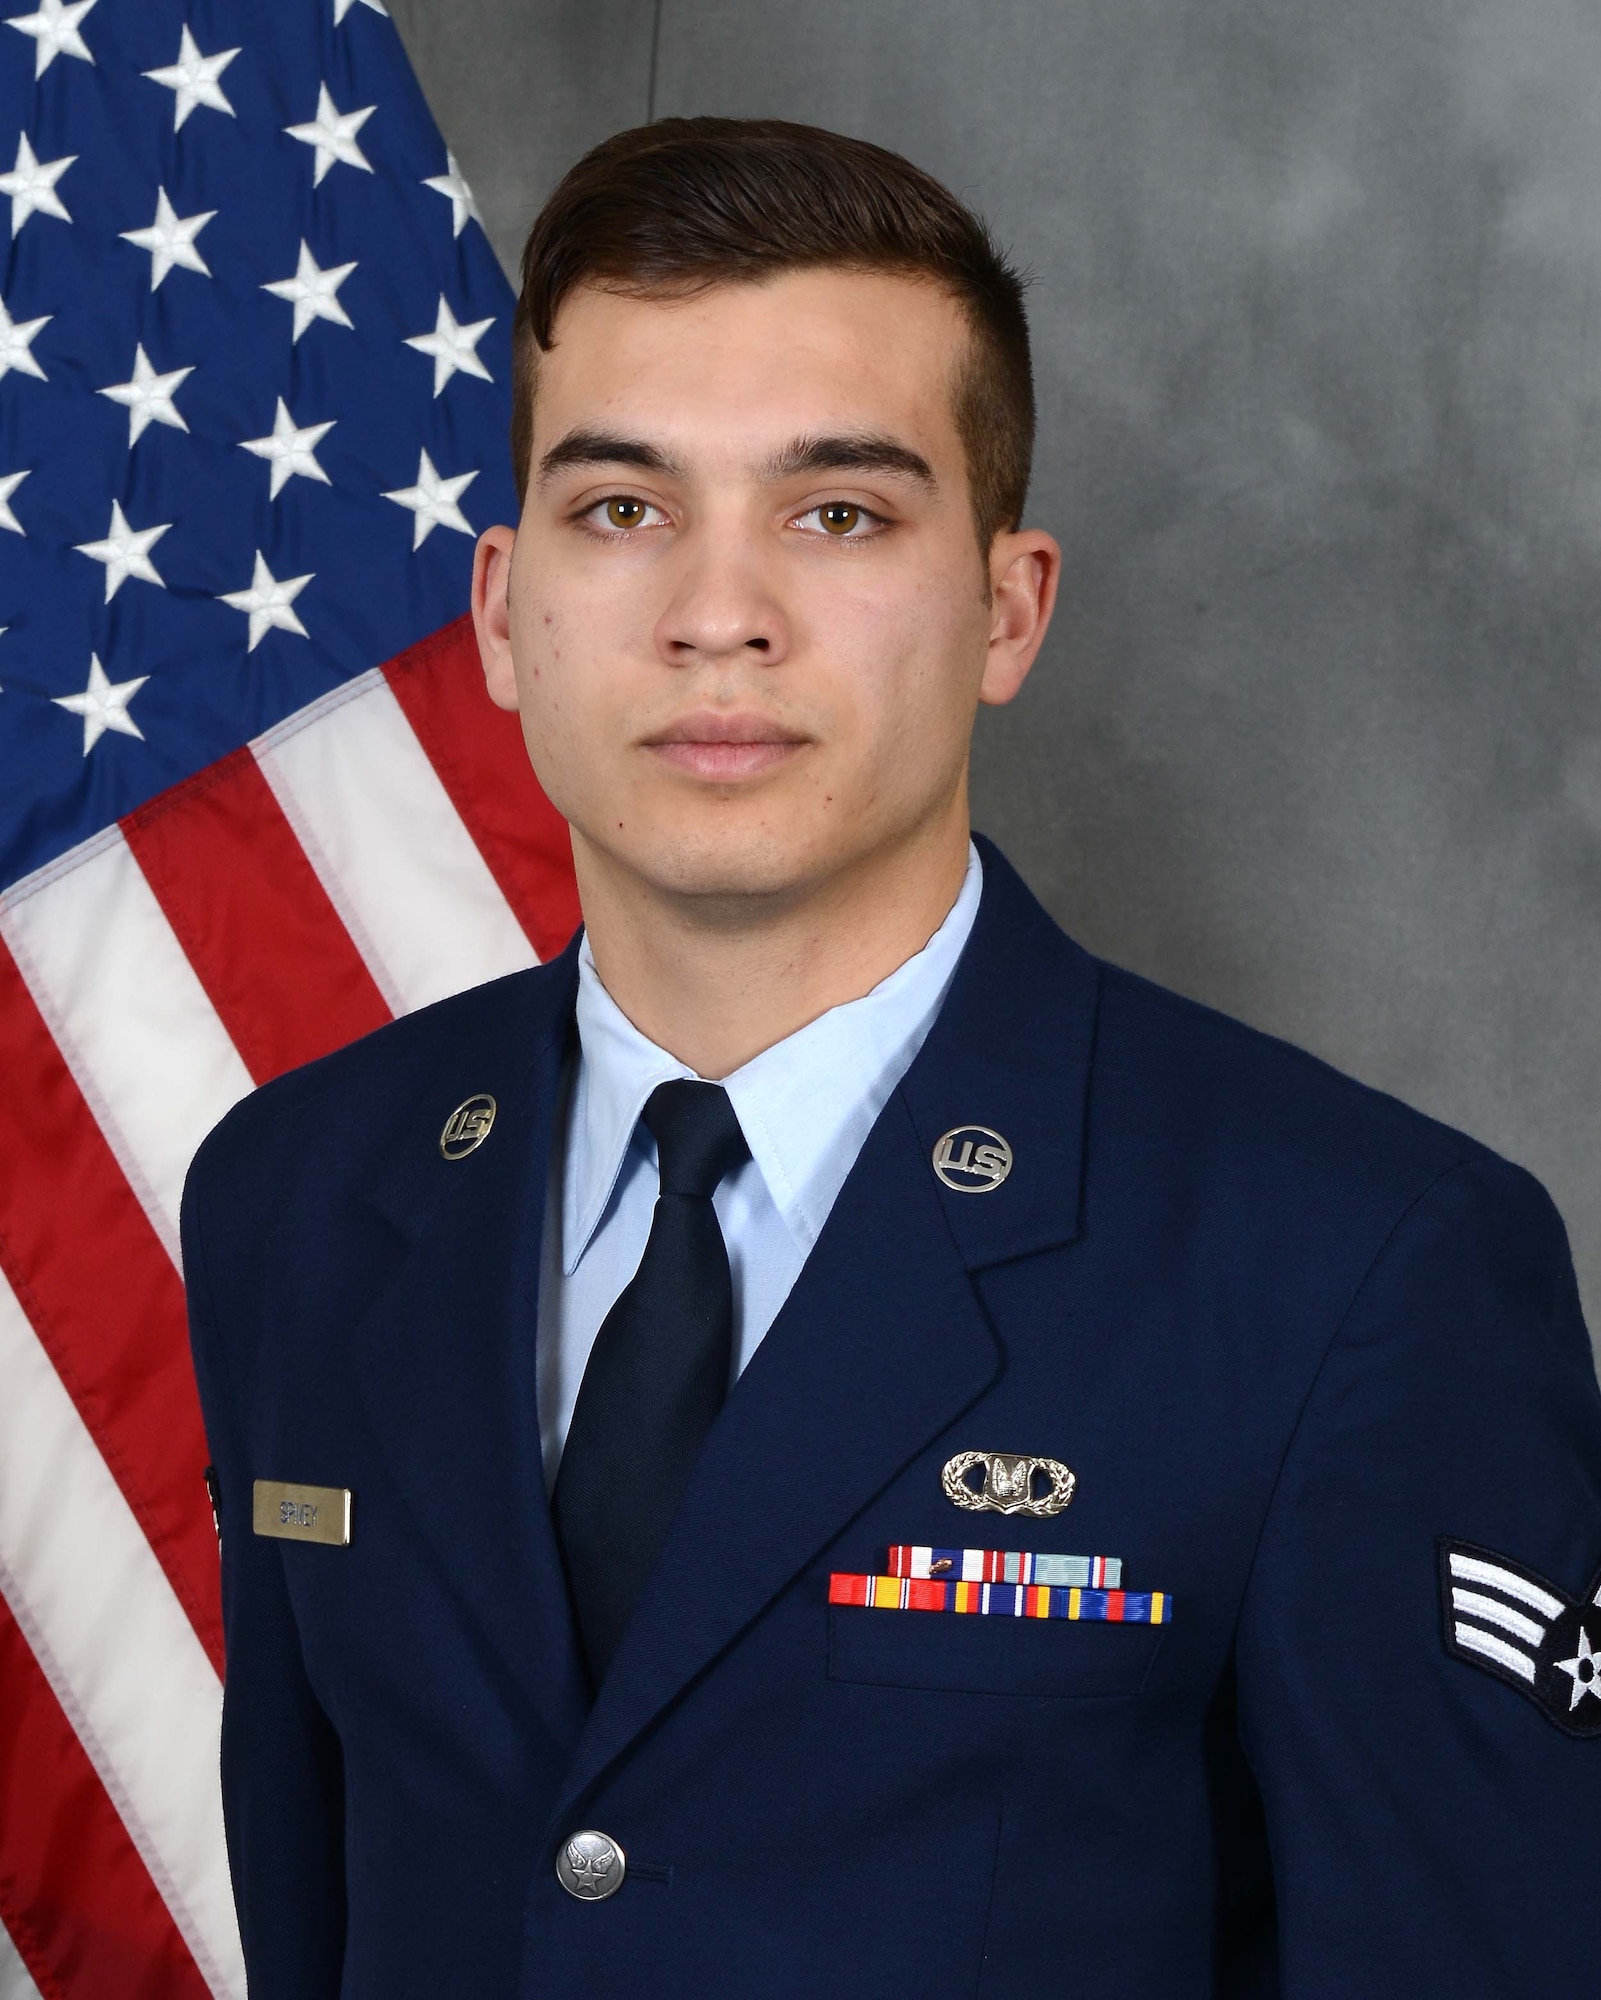 Senior Airman Jonathan Spivey, 22nd Operations Support Squadron Aircrew Flight Equipment journeyman, won 2016 U.S. Air Force AFE Outstanding Airman Award. Spivey has been stationed at McConnell Air Force Base for three years. (U.S. Air Force photo/Staff Sgt. Trevor Rhynes)